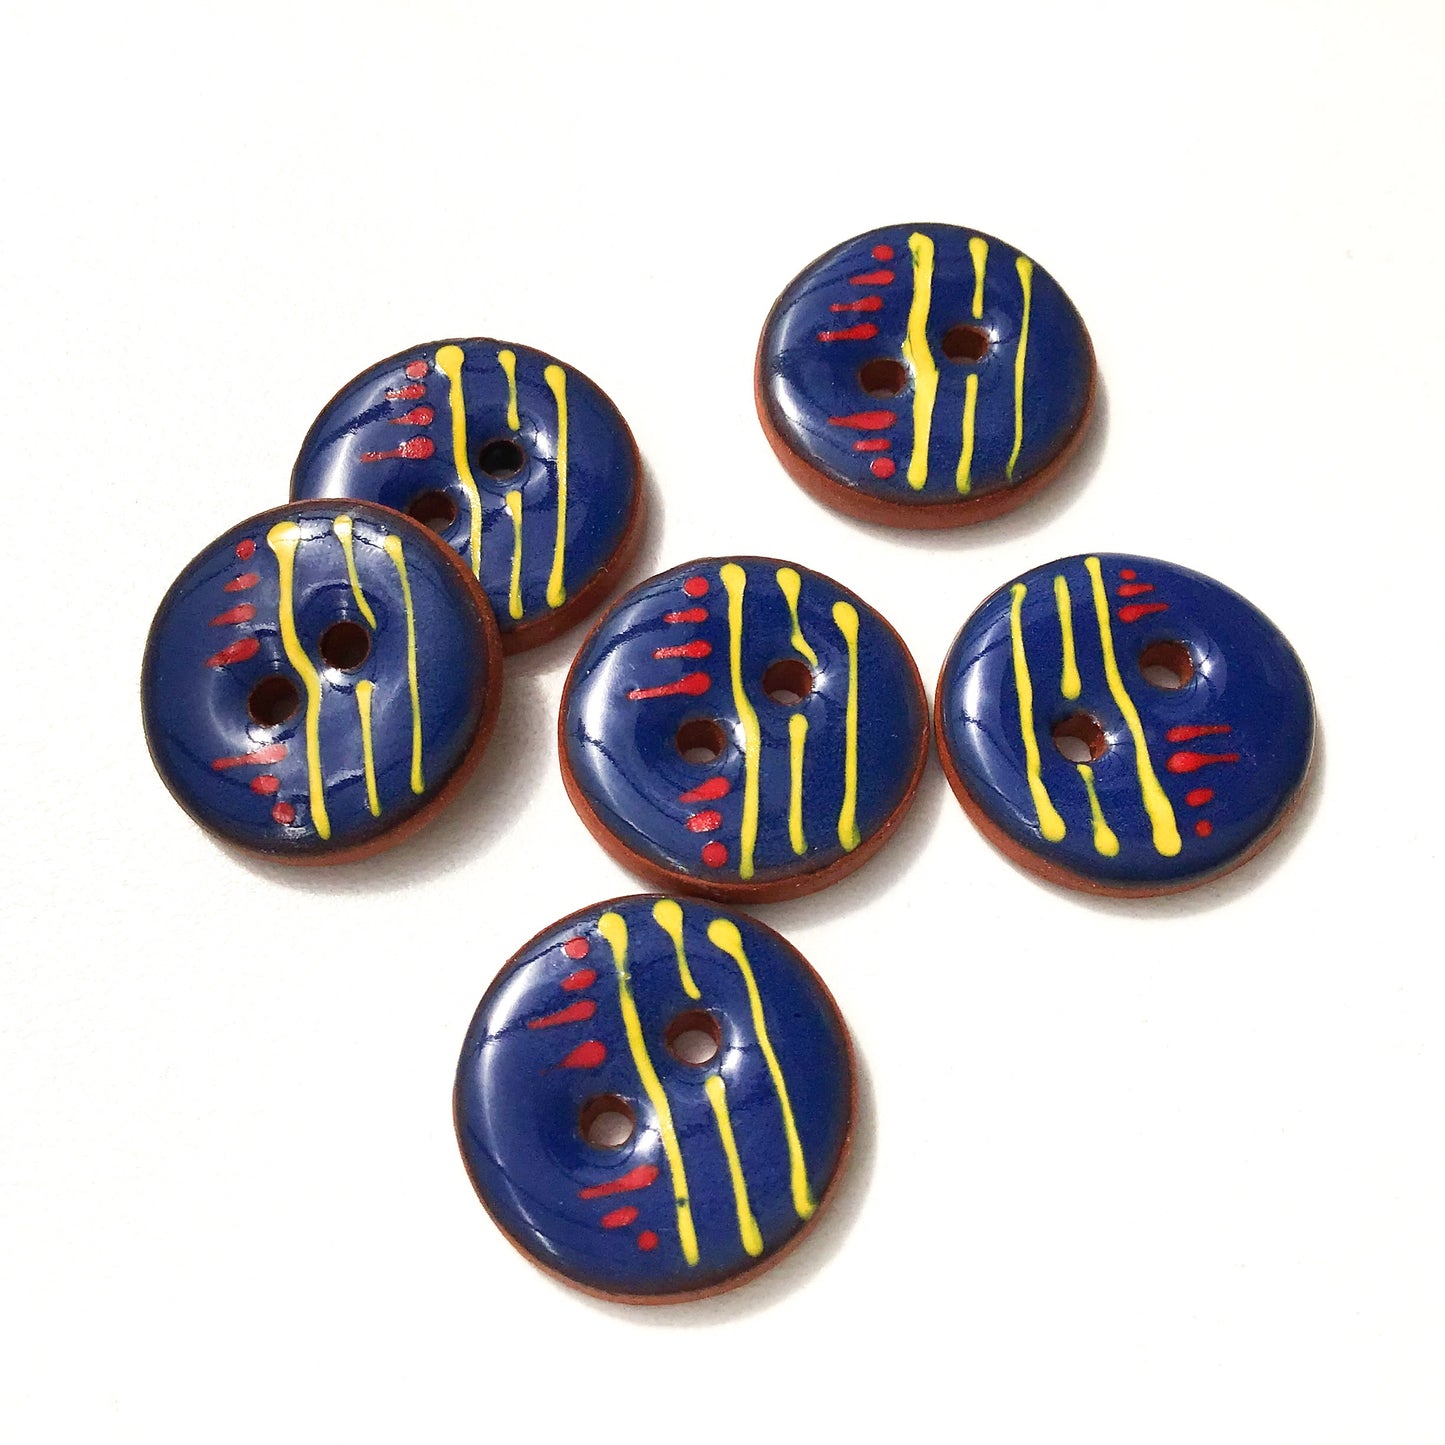 Deep Blue 'Line & Dash' Ceramic Buttons on Red Clay - Round Ceramic Buttons - 3/4" - 6 Pack